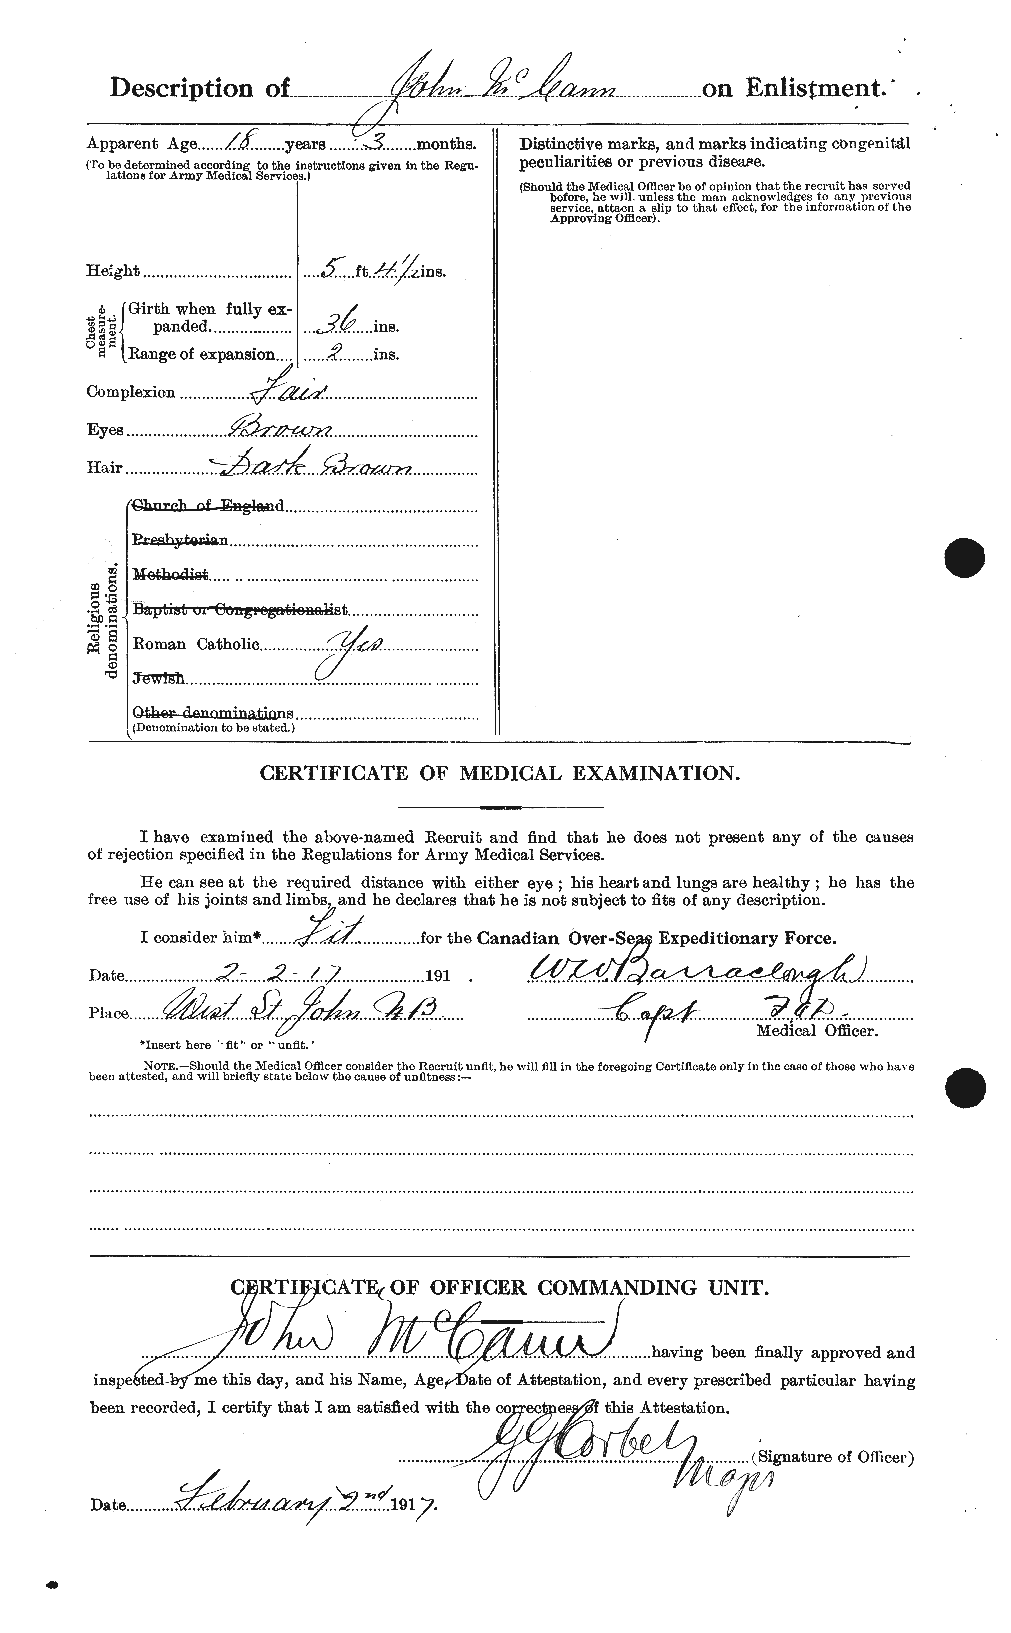 Personnel Records of the First World War - CEF 132726b